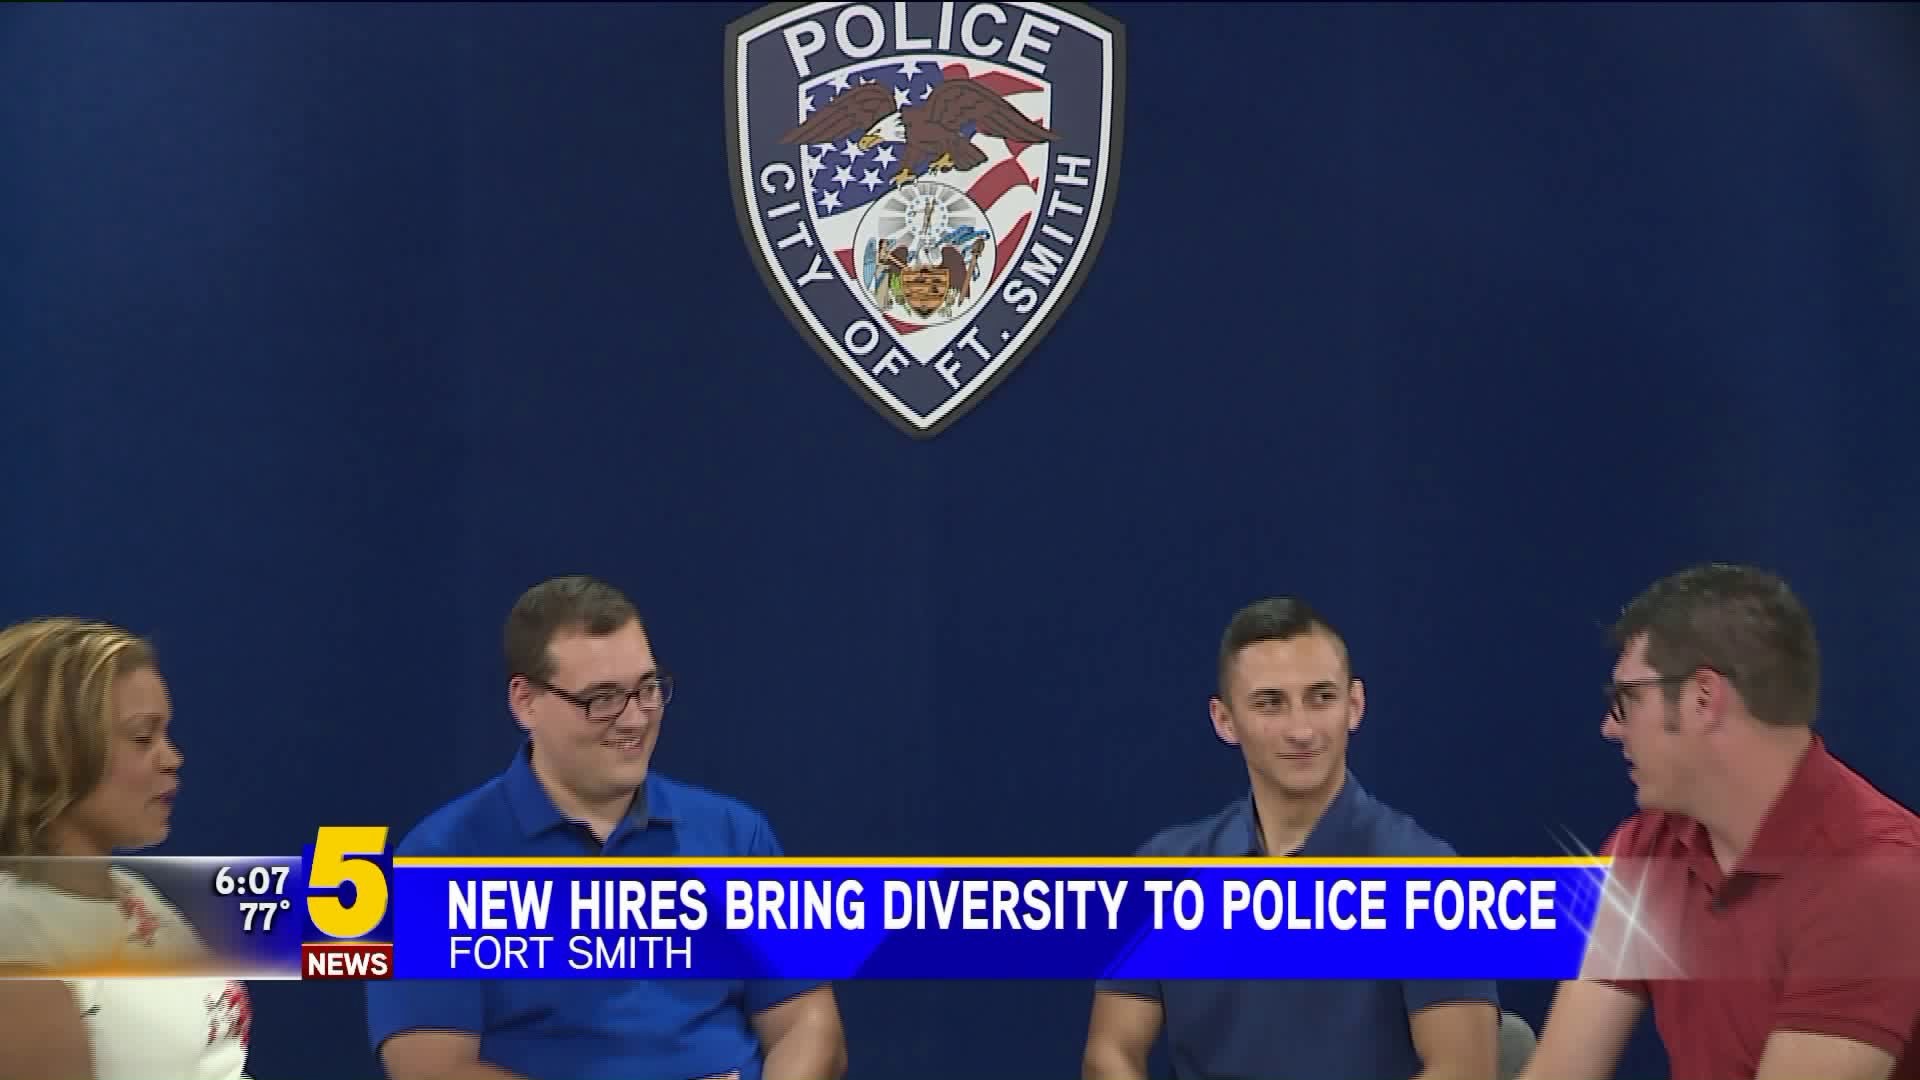 Fort Smith Police Officers